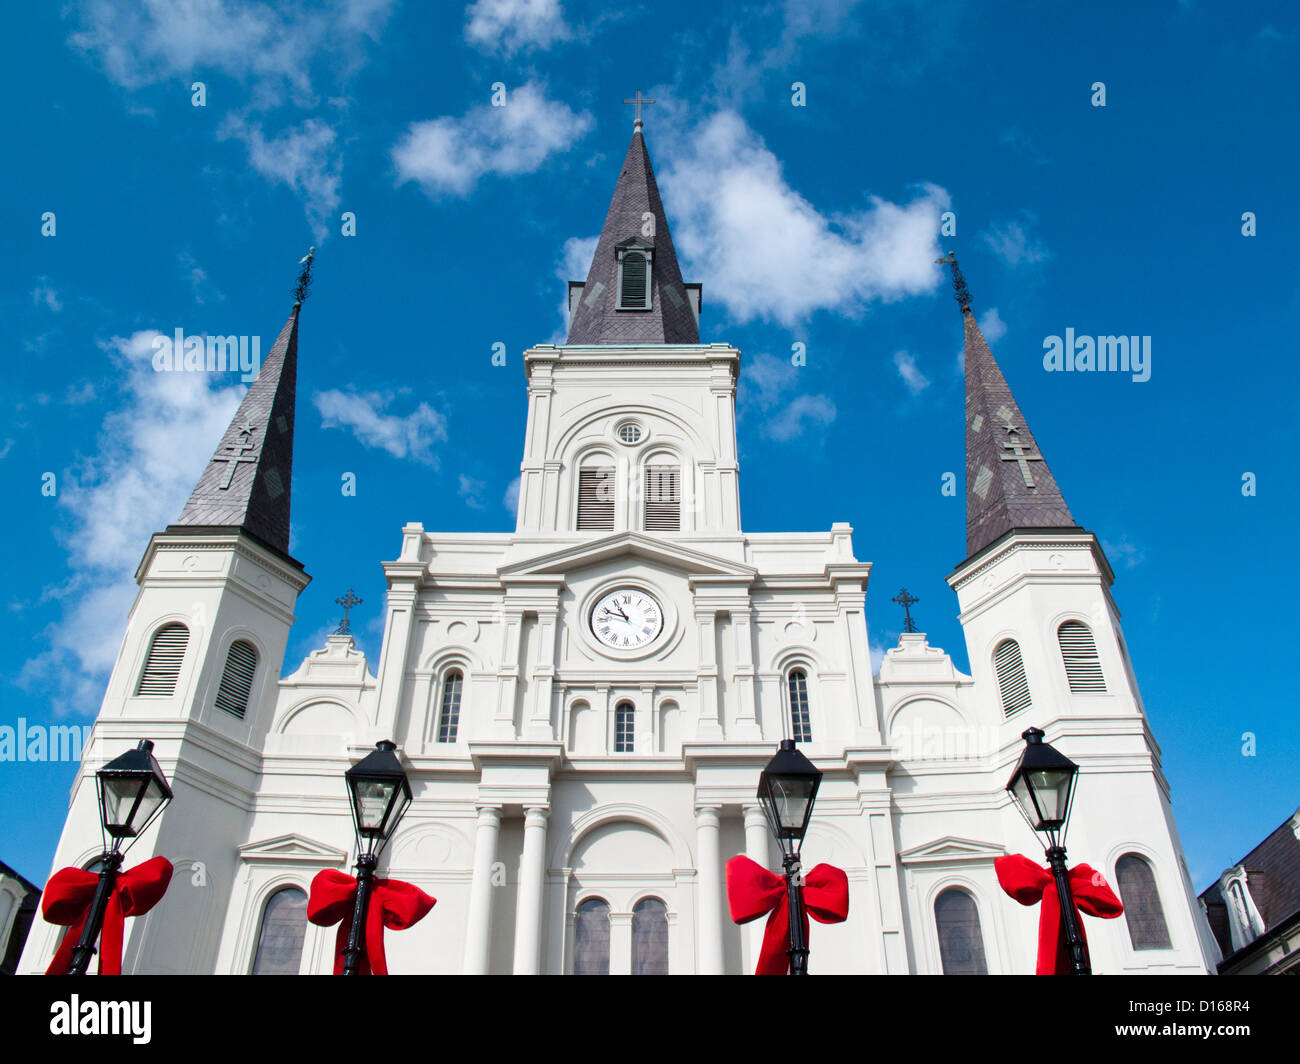 Christmas bows on lamps in Jackson Square, Saint Louis Cathedral; New Orleans, Louisiana, United States Stock Photo